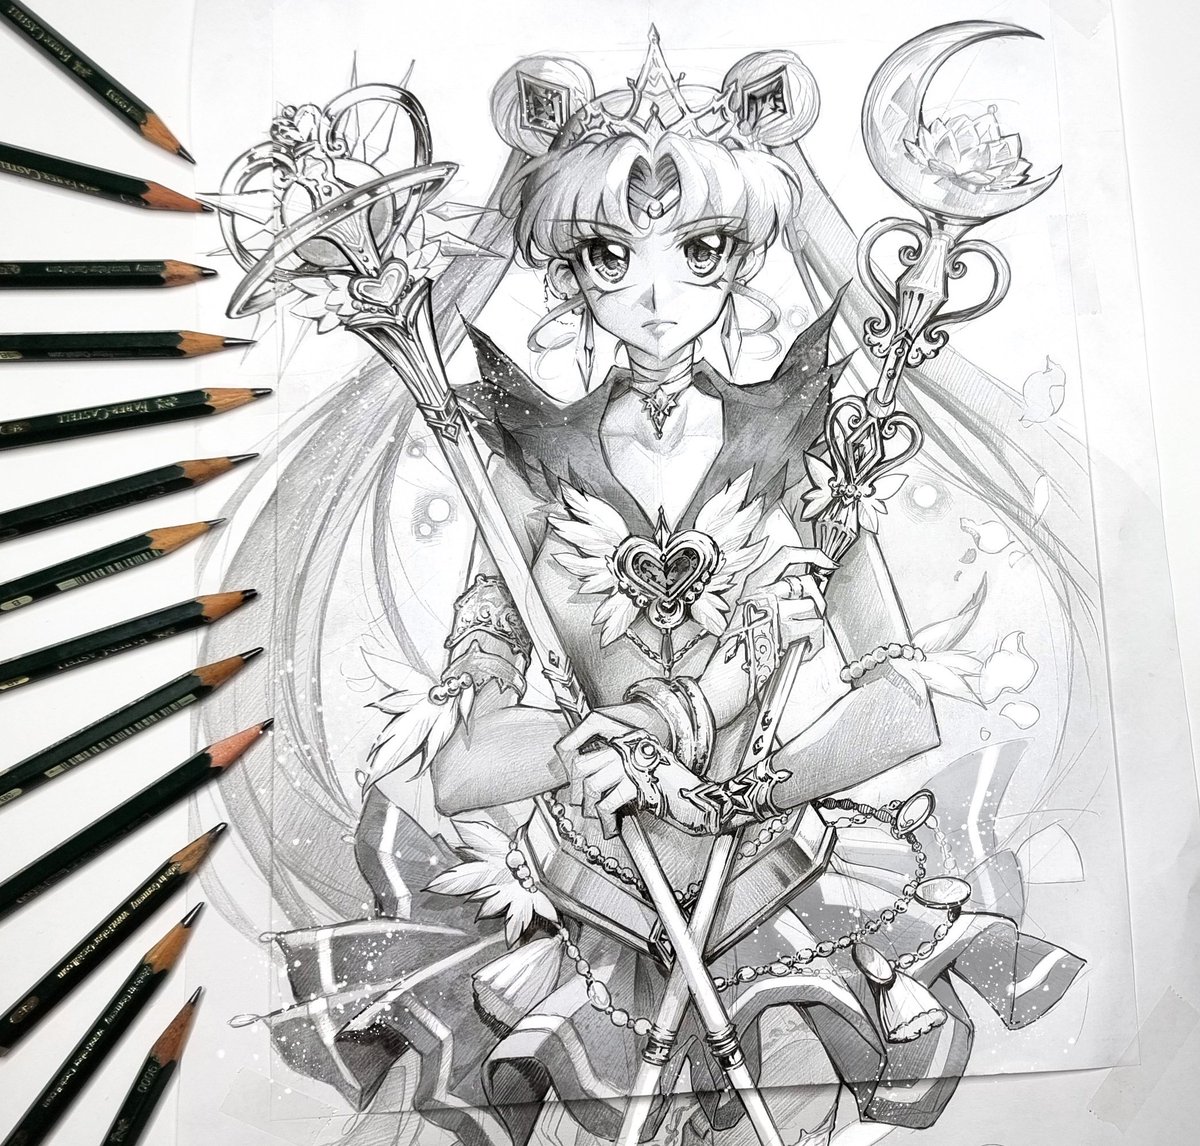 Finally #SailorMoon as a Moon Warrior. I startet with a draft for her 3 moths ago & i was afraid to draw the real #art until now, because i wasn't sure if i can do it right. But now it fehlt good to start.
#sailormooncrystal #naokotakeuchi #manga #anime #drawing #ink #pencilart